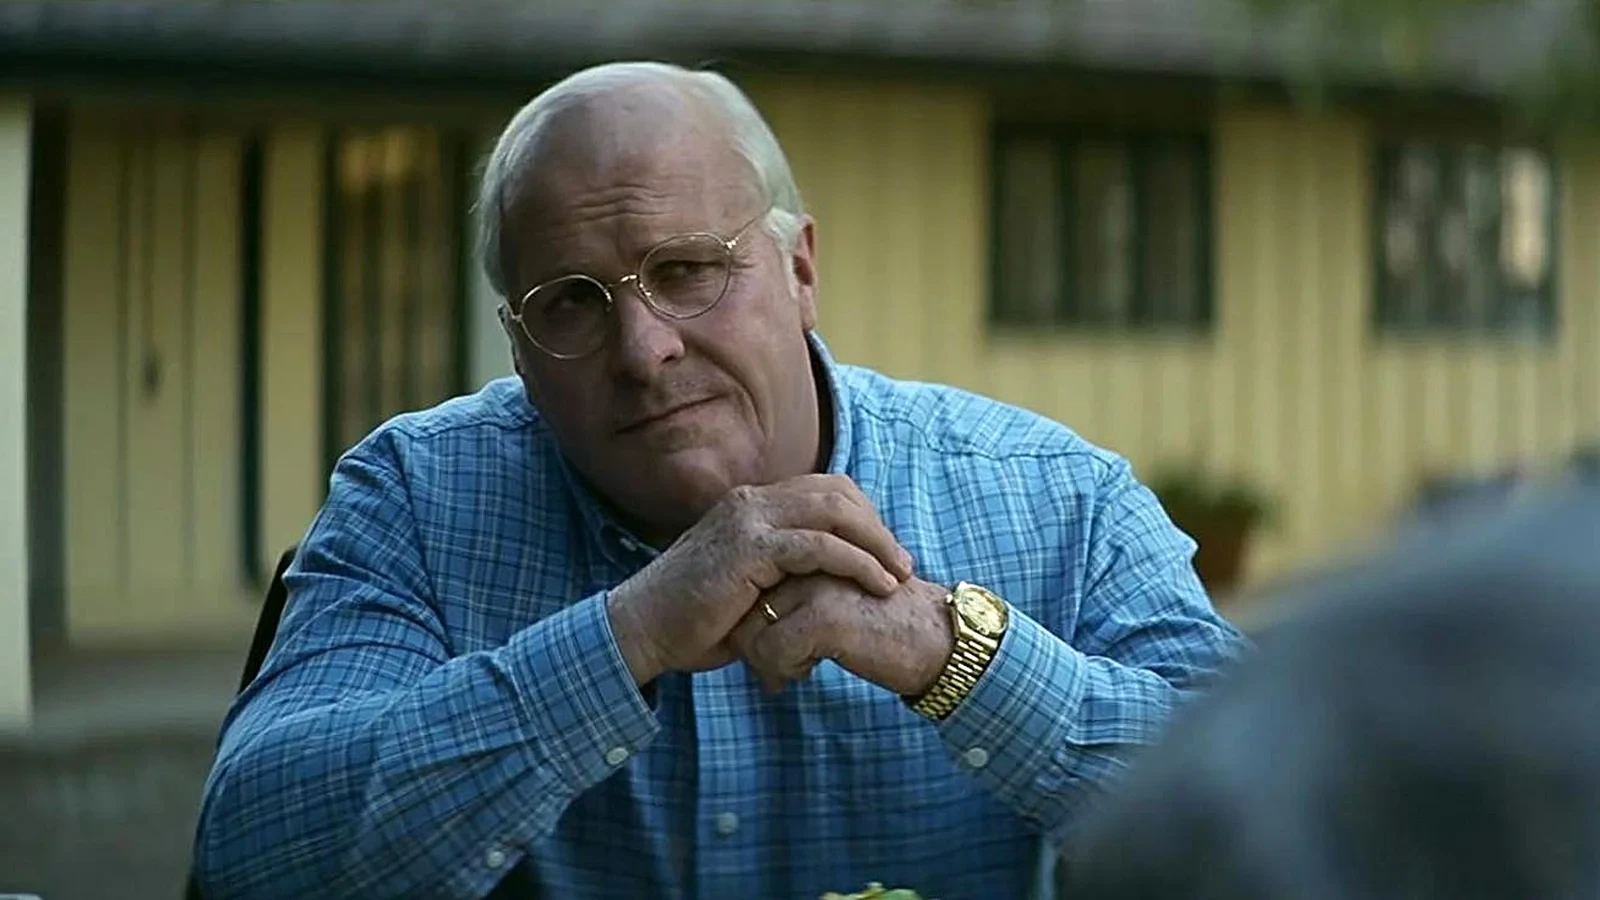 Christian Bale as Dick Cheney in Vice (2018)